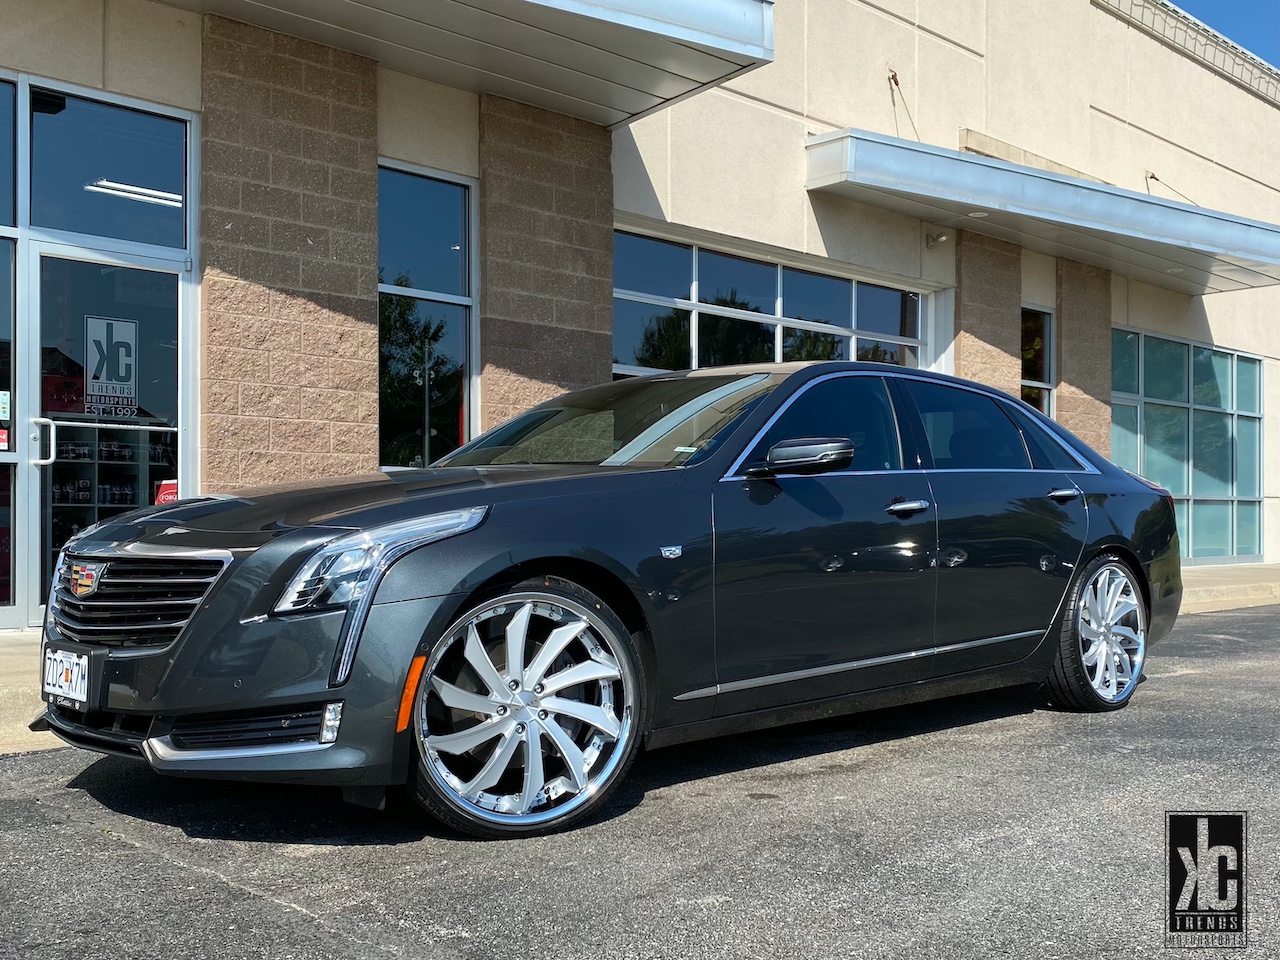  Cadillac CT6 with 